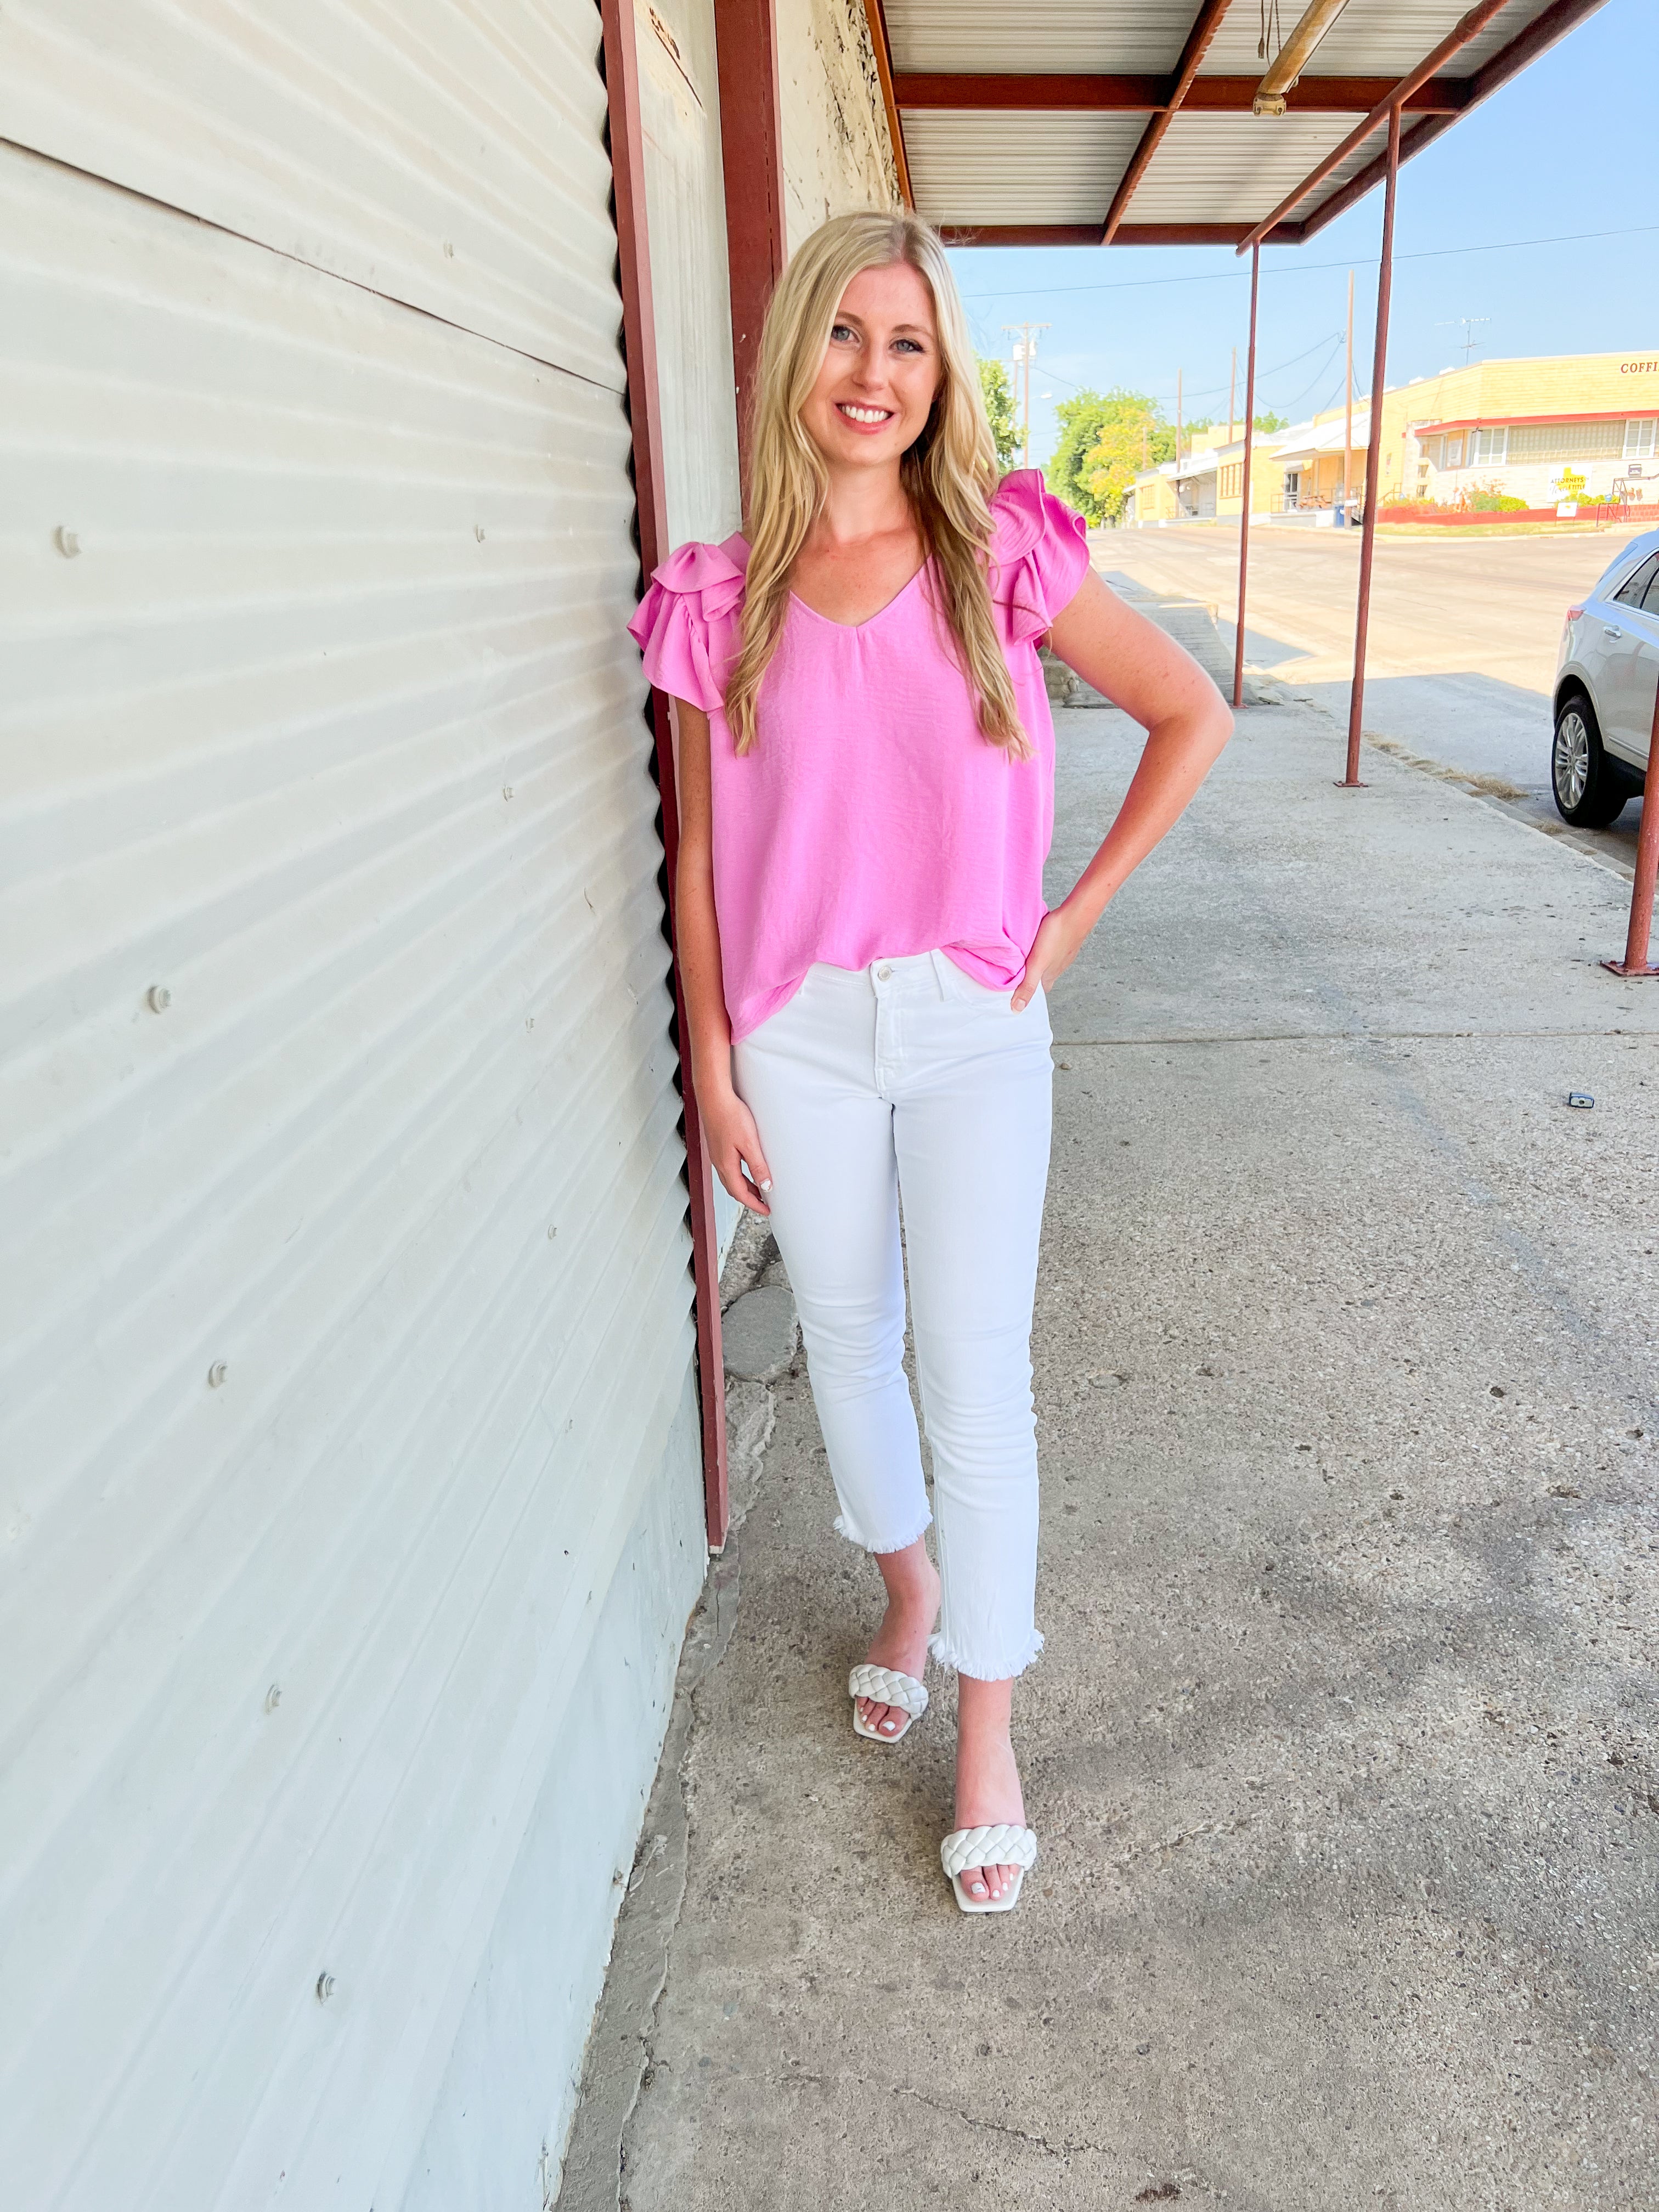 Short Sleeve Ruffle Blouse in Pink - JD Ranch Boutique